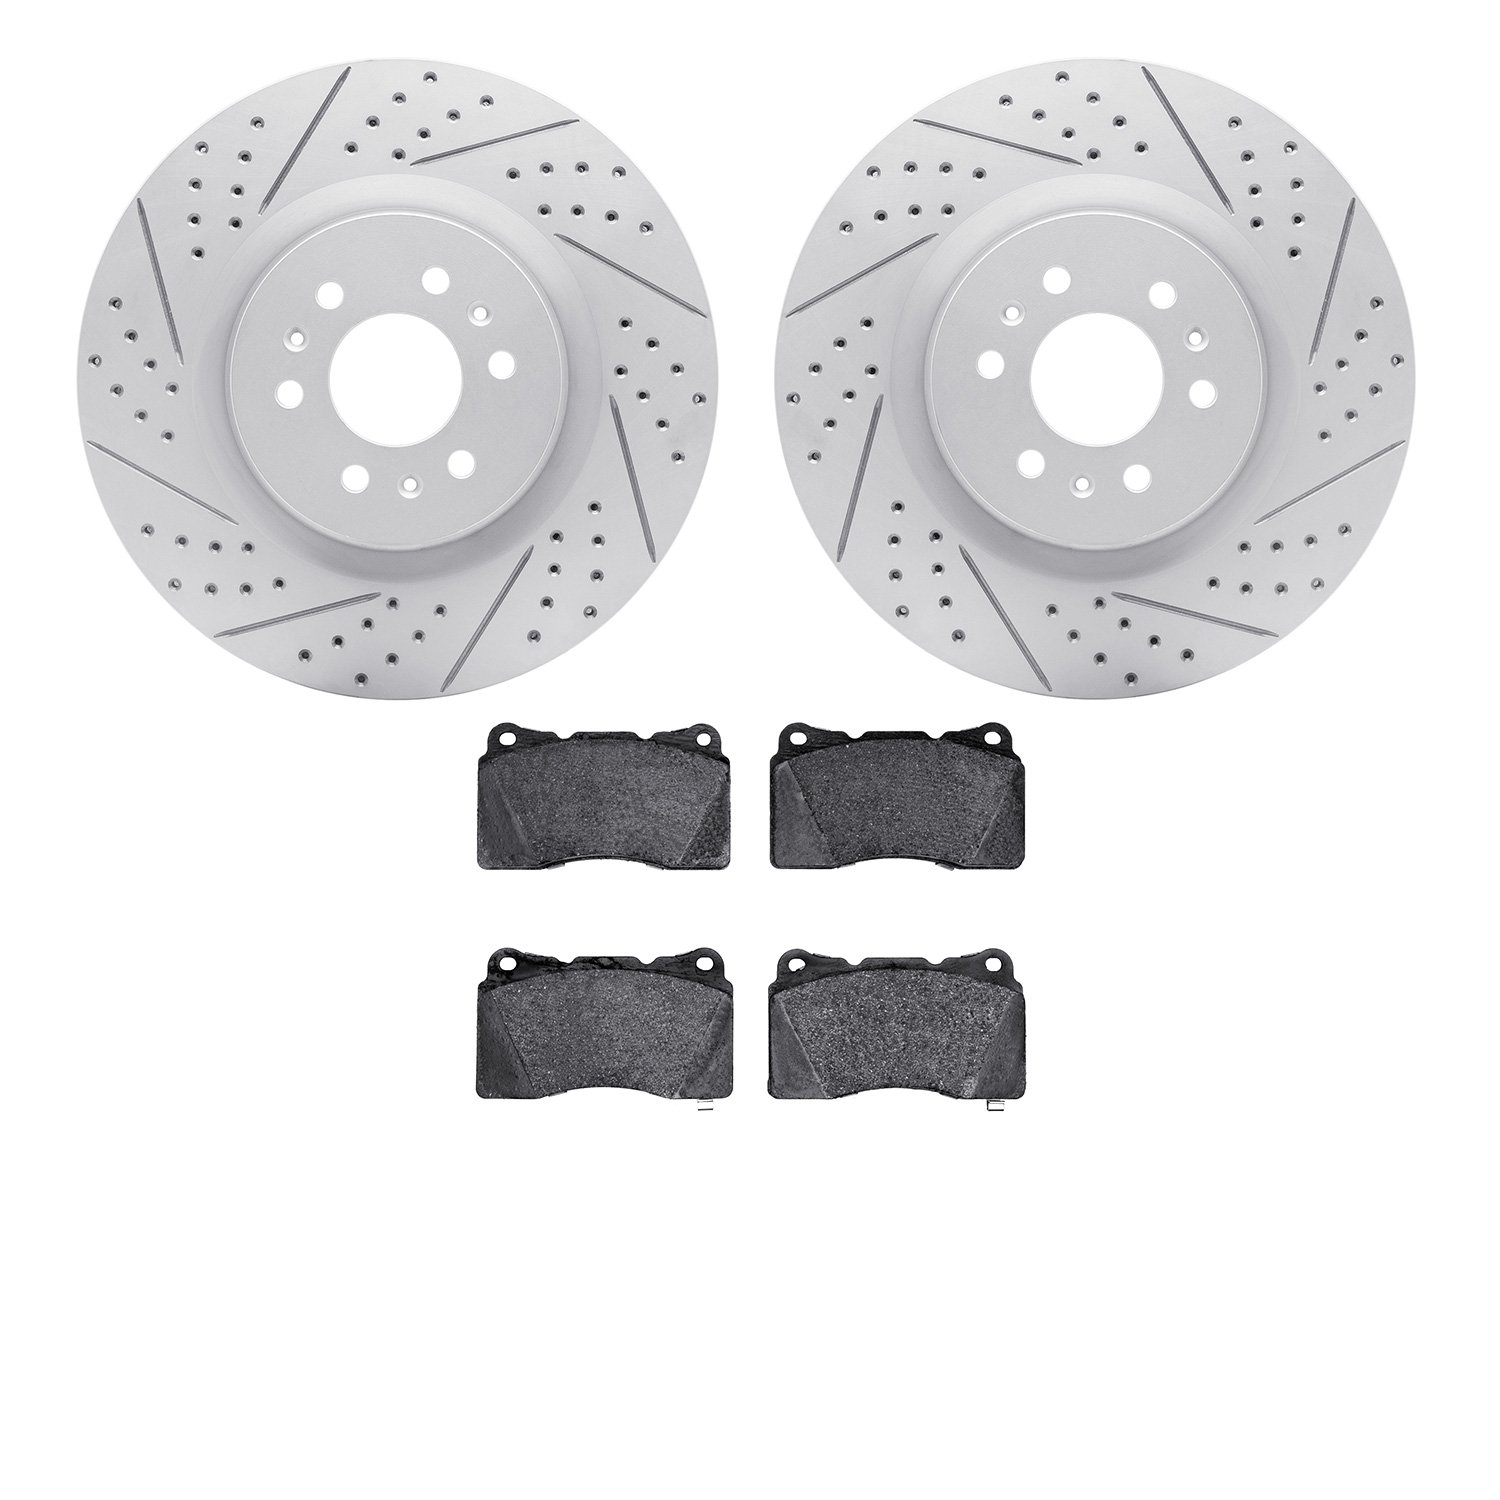 2502-46008 Geoperformance Drilled/Slotted Rotors w/5000 Advanced Brake Pads Kit, 2004-2011 GM, Position: Front